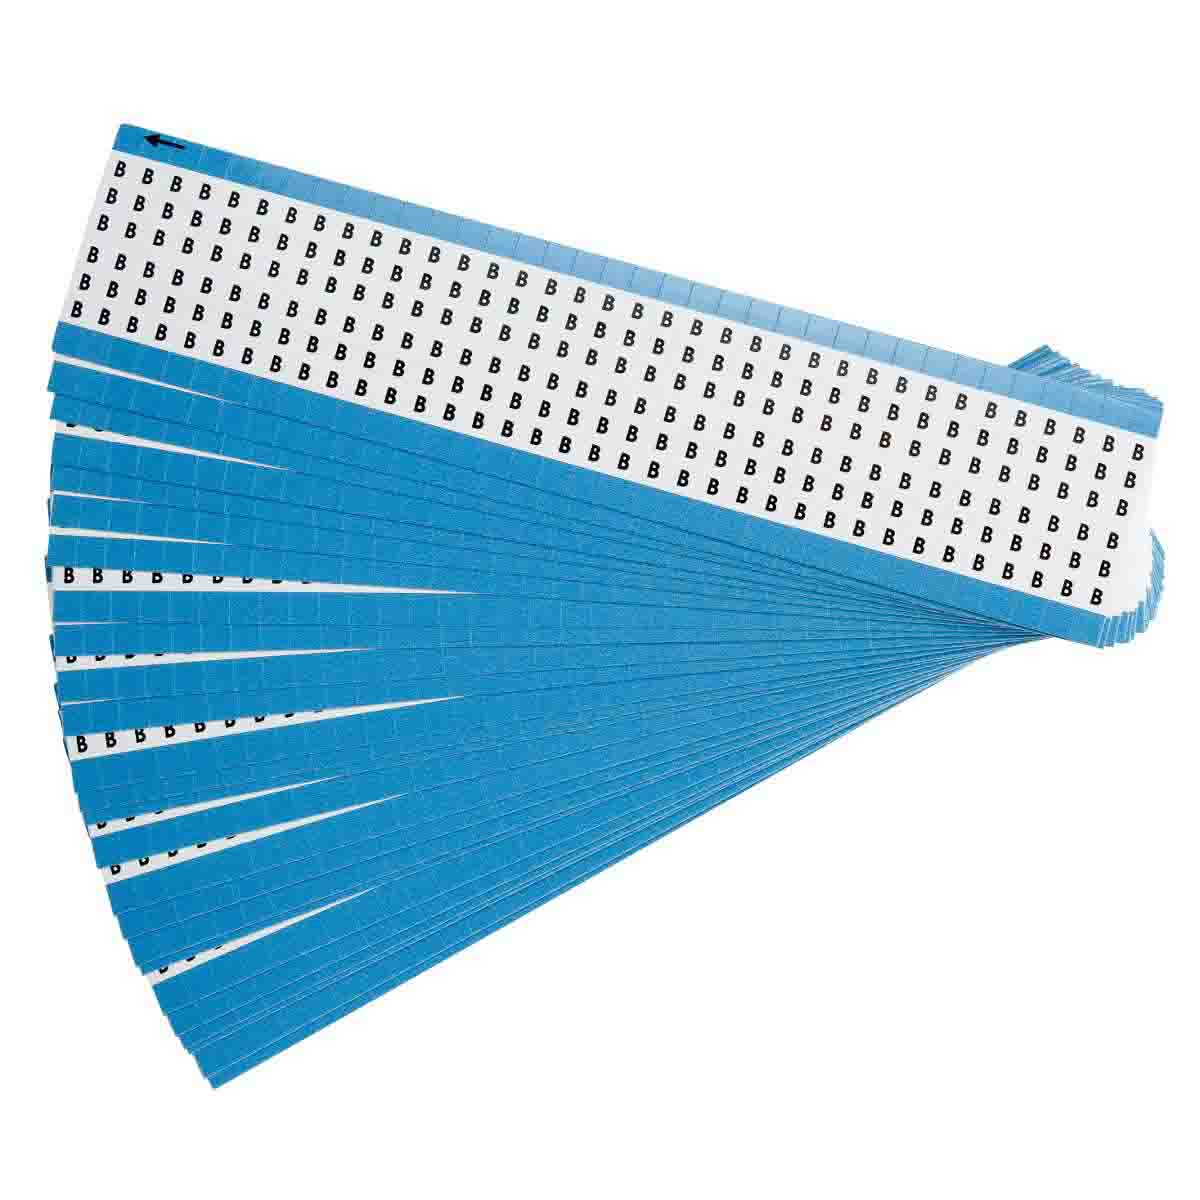 25 Cards Brady WM-281-PK Repositionable Vinyl Cloth Black on White B-500 Solid Numbers Wire Marker Card 